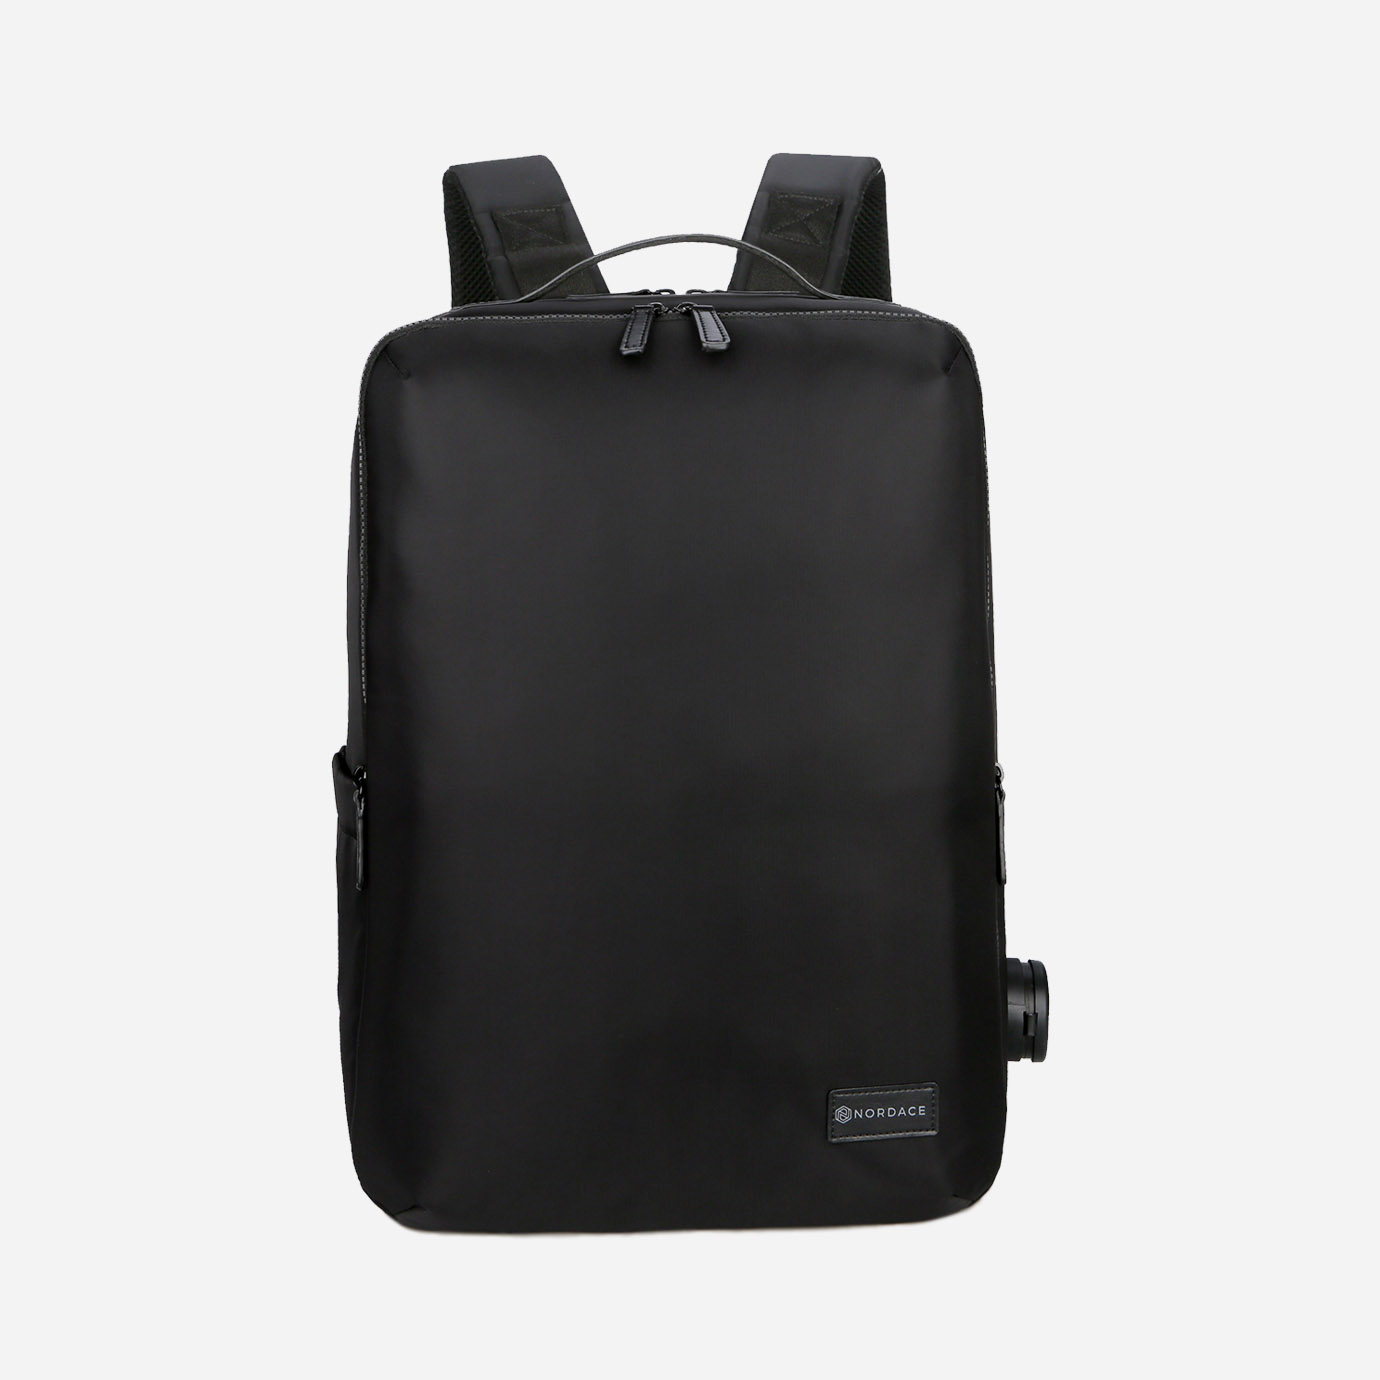 nordace.com | Nordace Laval – Smart Backpack